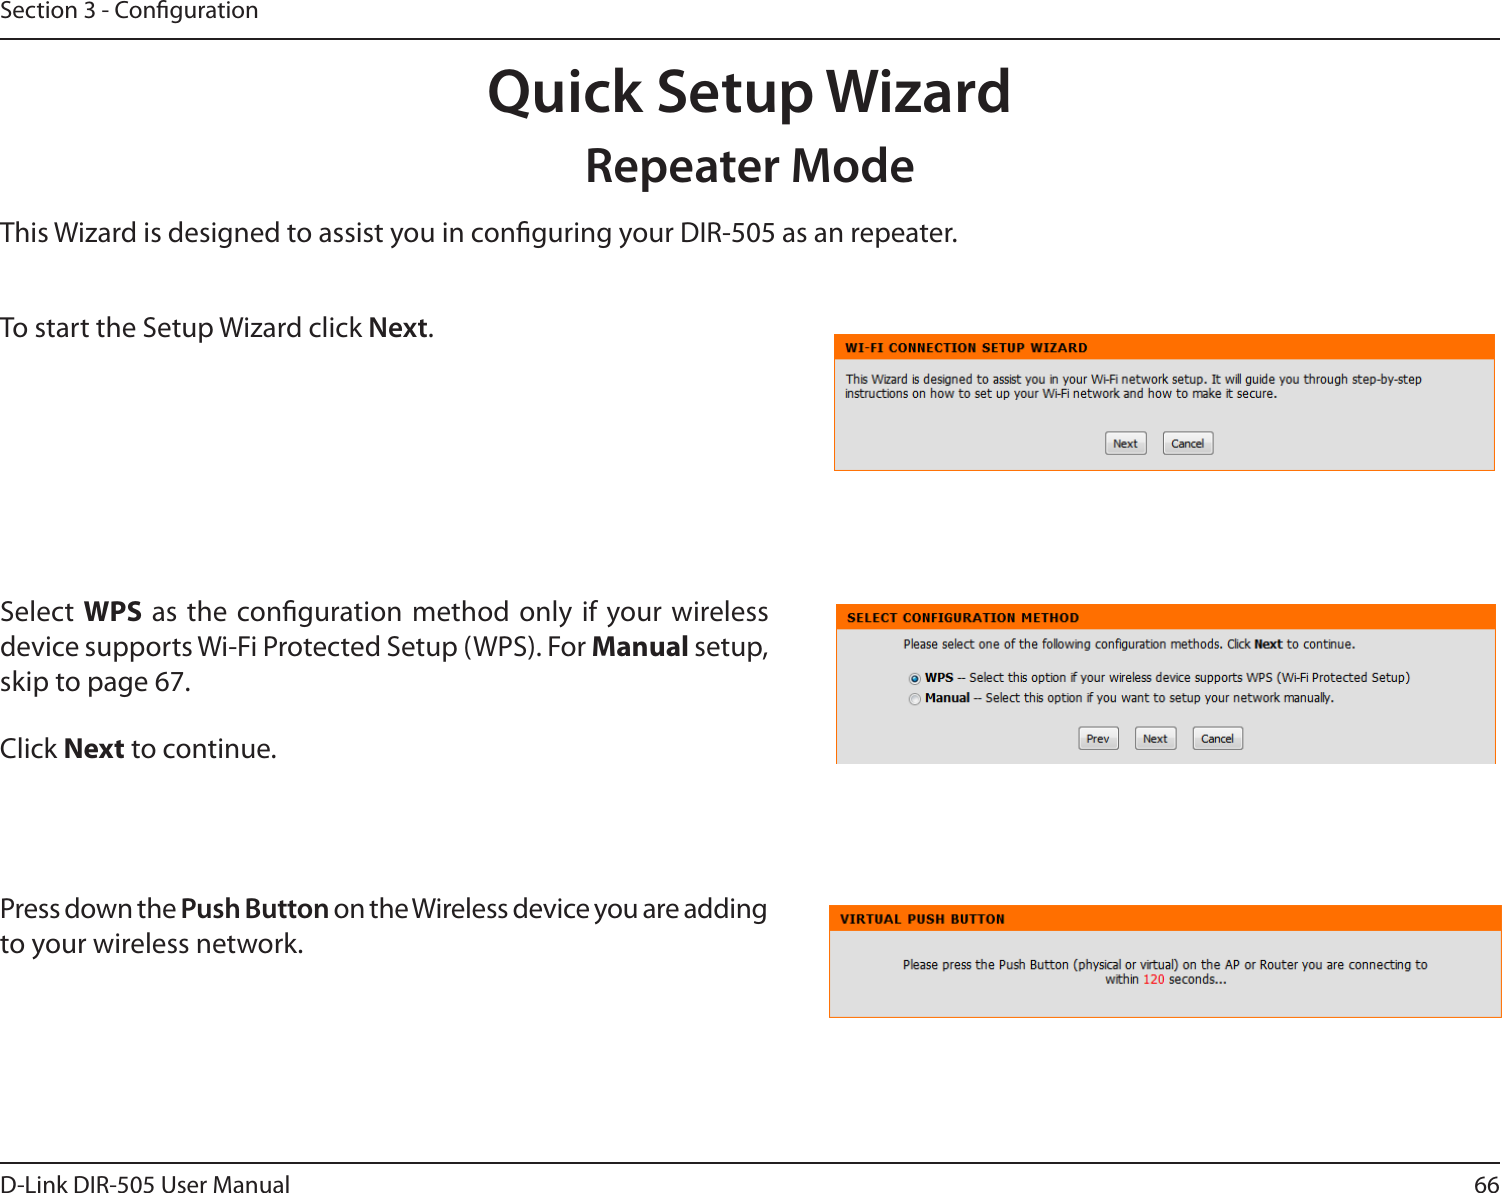 66D-Link DIR-505 User ManualSection 3 - CongurationQuick Setup WizardRepeater ModeThis Wizard is designed to assist you in conguring your DIR-505 as an repeater.Select WPS as the  conguration method only  if your wireless device supports Wi-Fi Protected Setup (WPS). For Manual setup, skip to page 67.Click Next to continue.Press down the Push Button on the Wireless device you are adding to your wireless network. To start the Setup Wizard click Next.